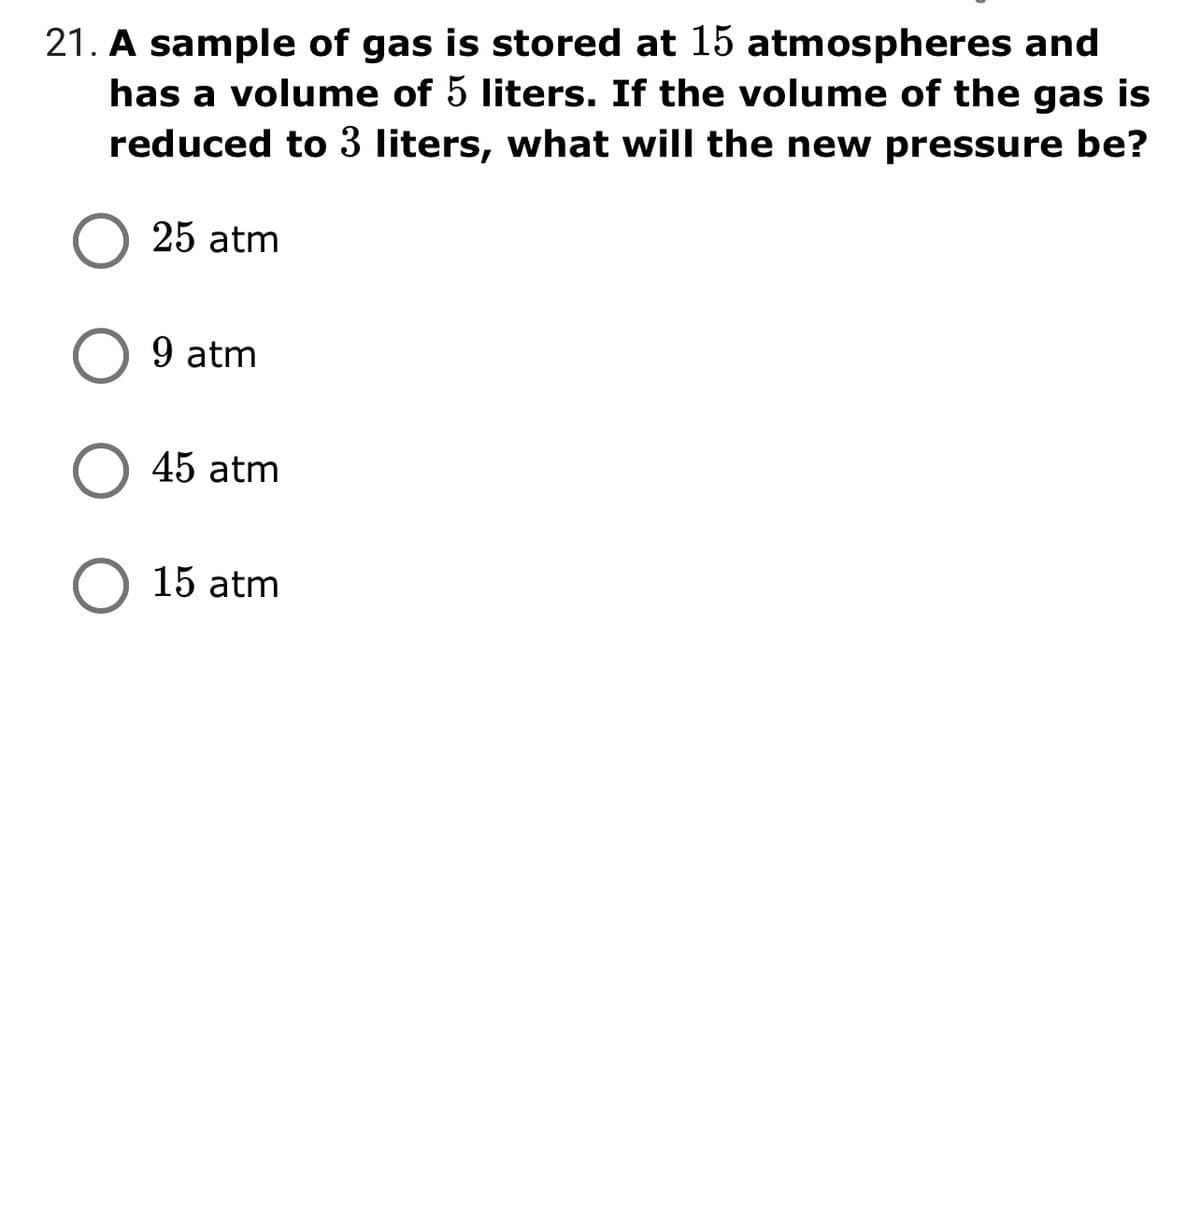 21. A sample of gas is stored at 15 atmospheres and
has a volume of 5 liters. If the volume of the gas is
reduced to 3 liters, what will the new pressure be?
25 atm
9 atm
O 45 atm
O 15 atm
